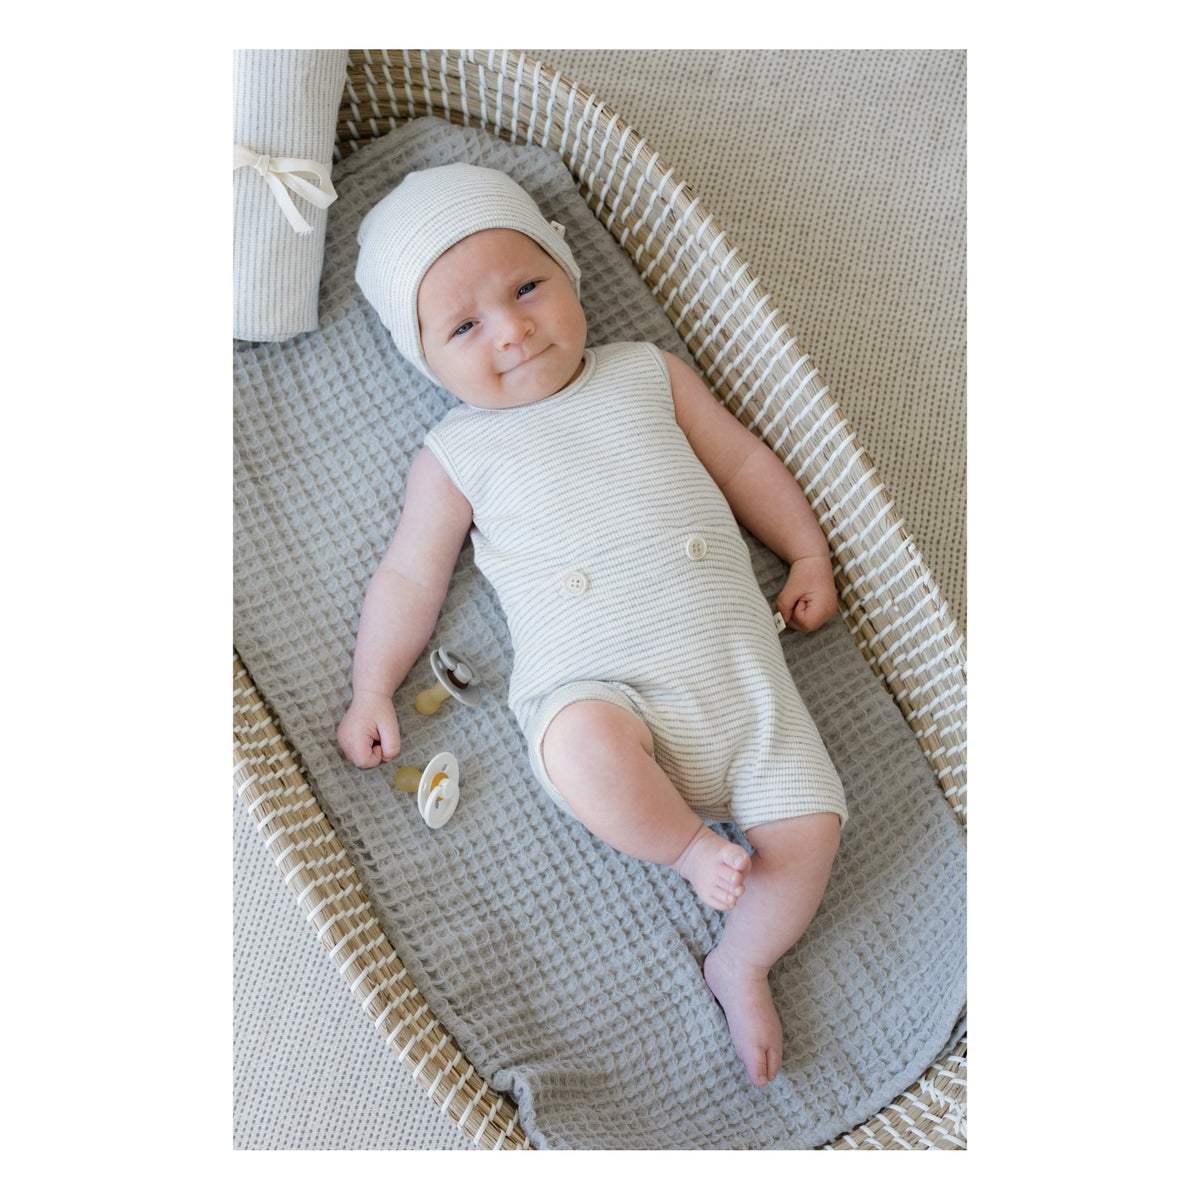 Baby lying down with white and grey beanie on